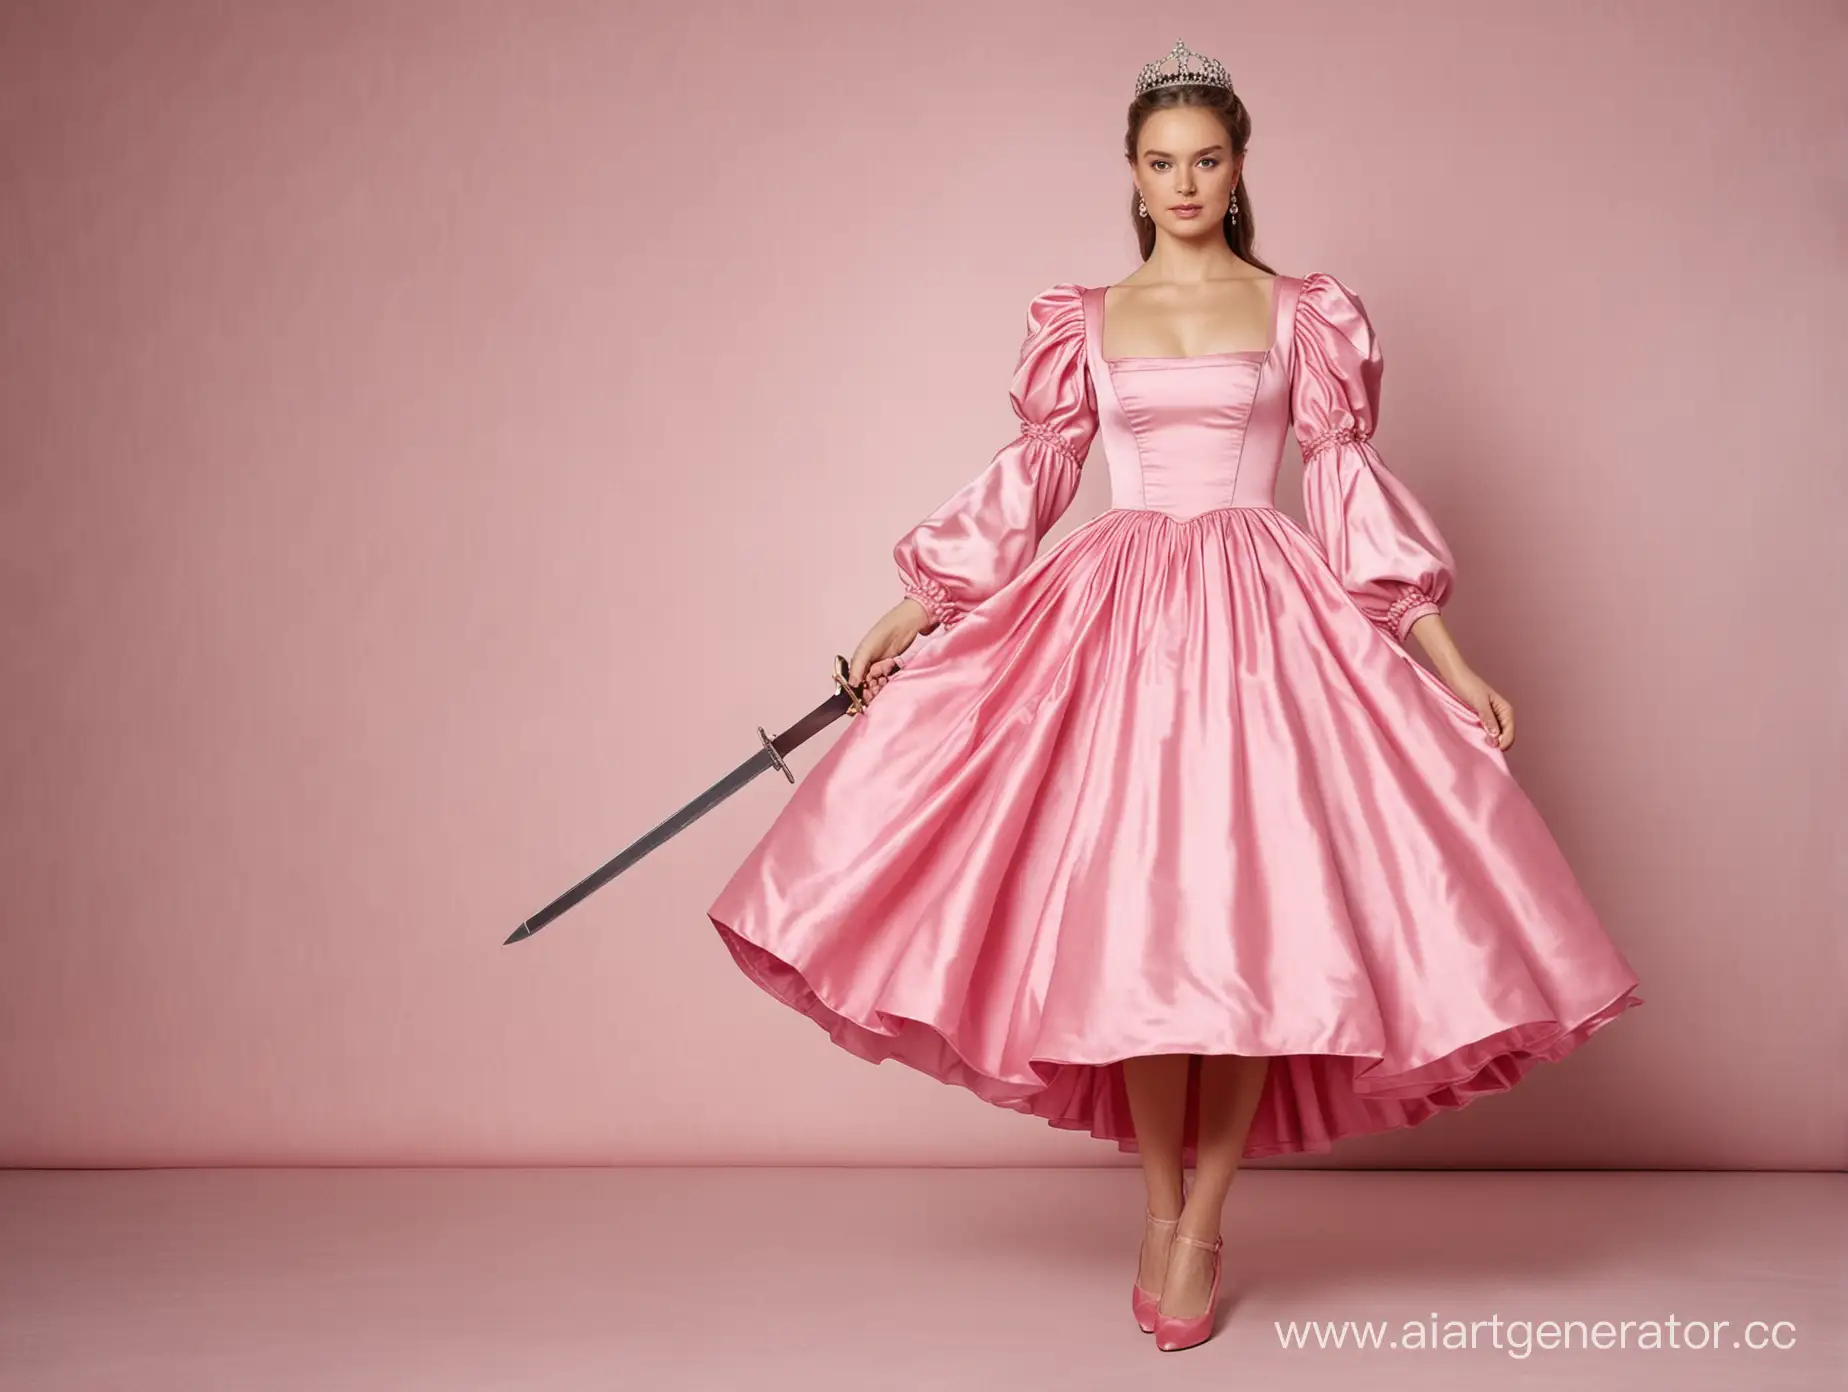 Young-Queen-in-Pink-Satin-Dress-with-Sword